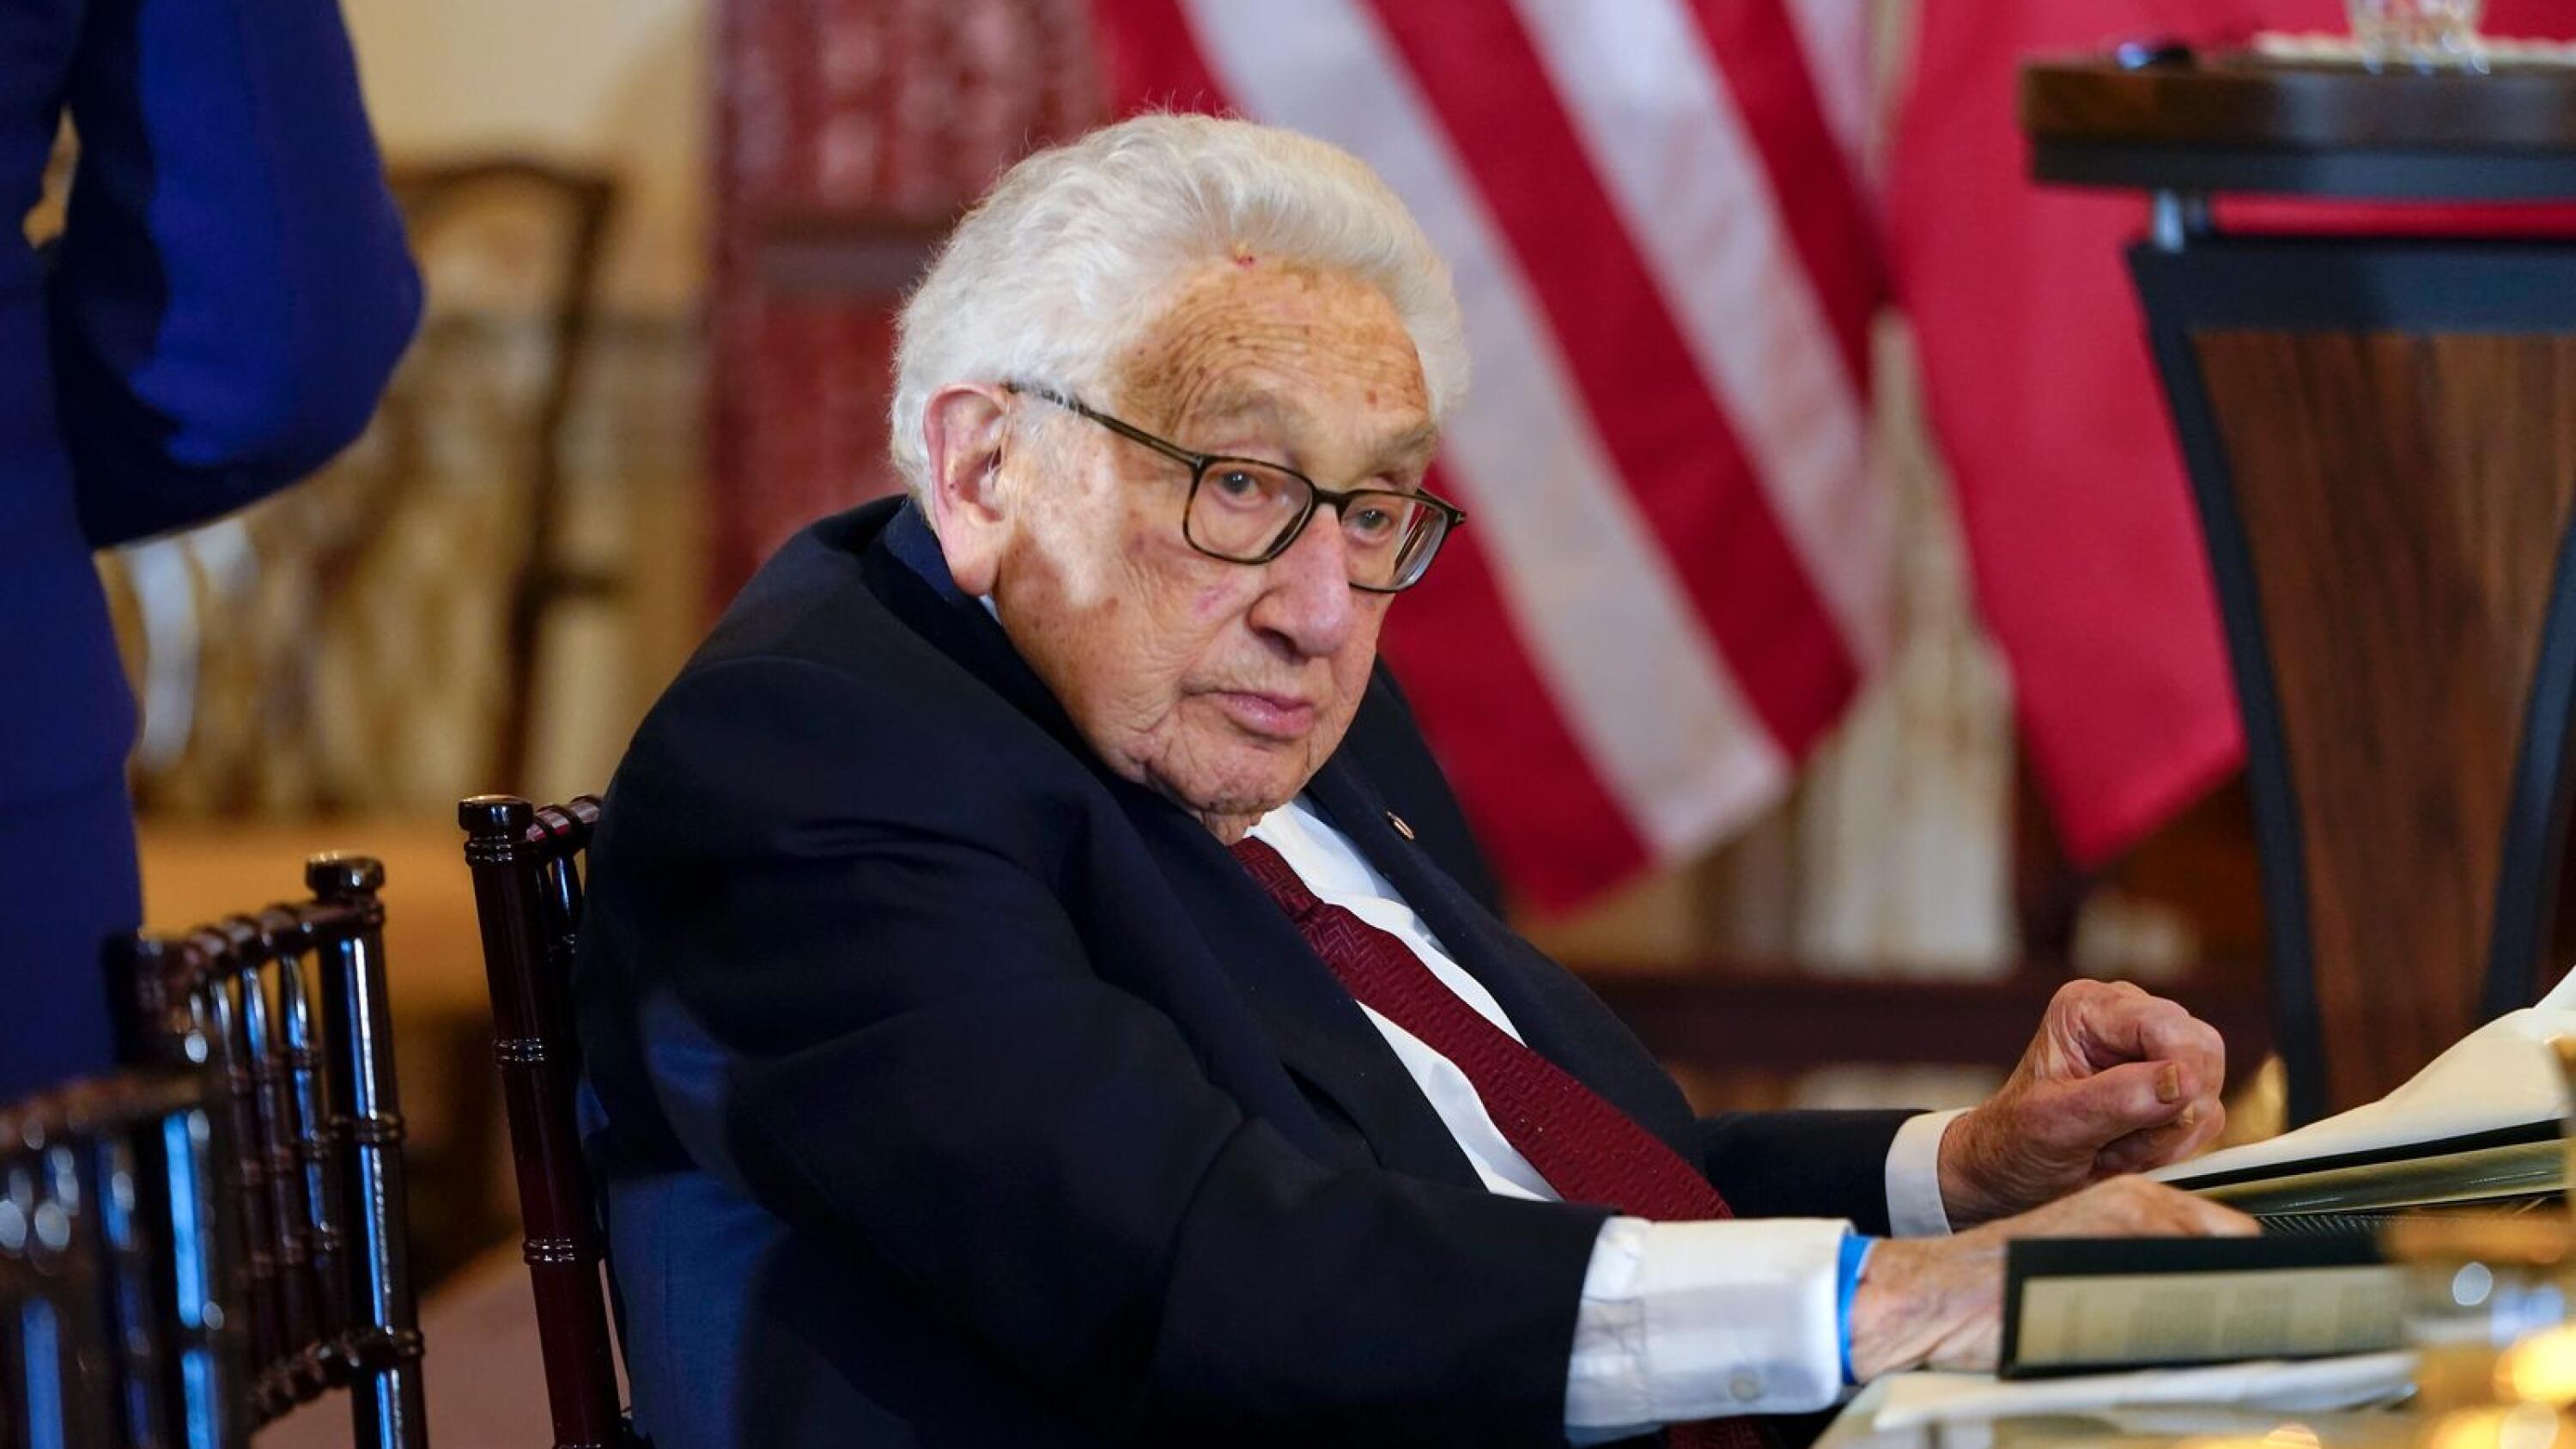 Kissinger celebrates 100th birthday, still active in global affairs